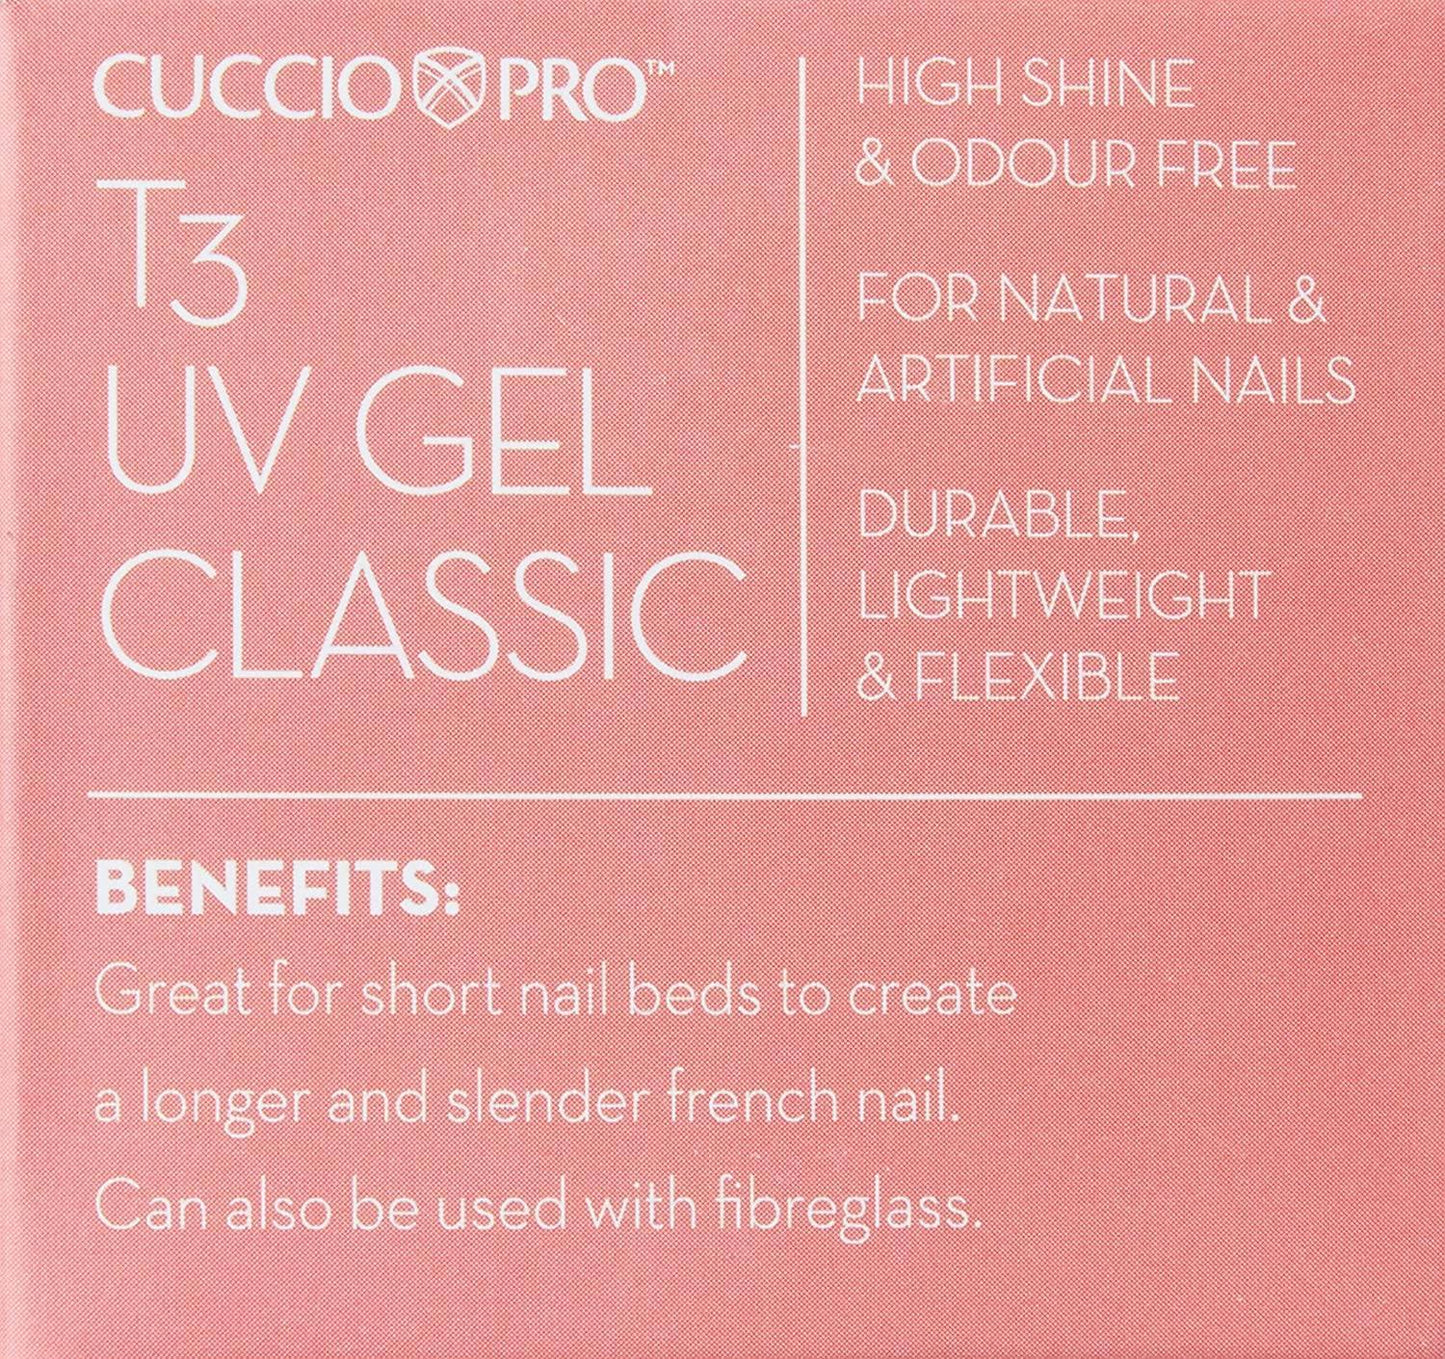 Cuccio Pro T3 UV Gel Clear for High Shine Natural and Artificial Nails 28g - Sanida Beauty